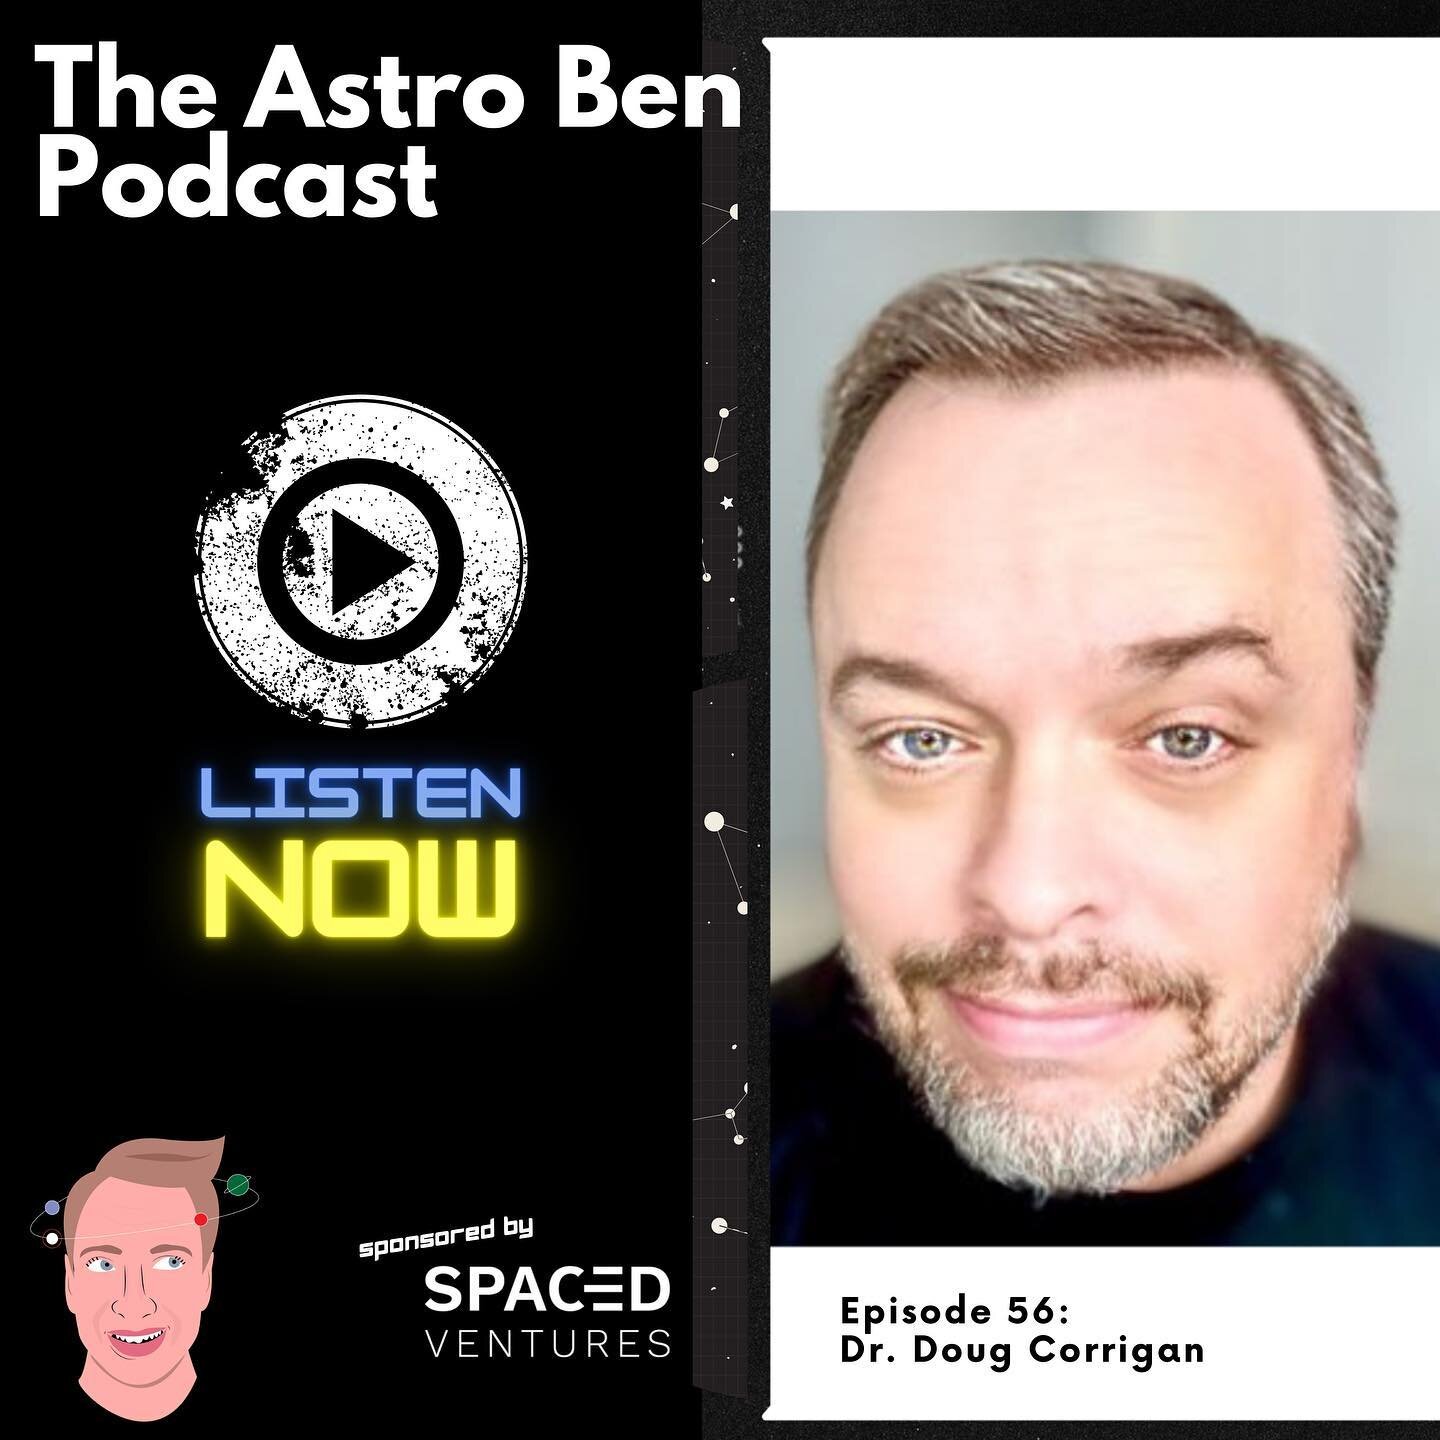 Episode 56: @sciencewithdrdoug a physicist, biochemist, and molecular biologist, and is the author of the book &ldquo;The Author of Light.&rdquo; As a Graduate Fellow, he worked with @nasa on microgravity experiments that flew aboard the Space Shuttl